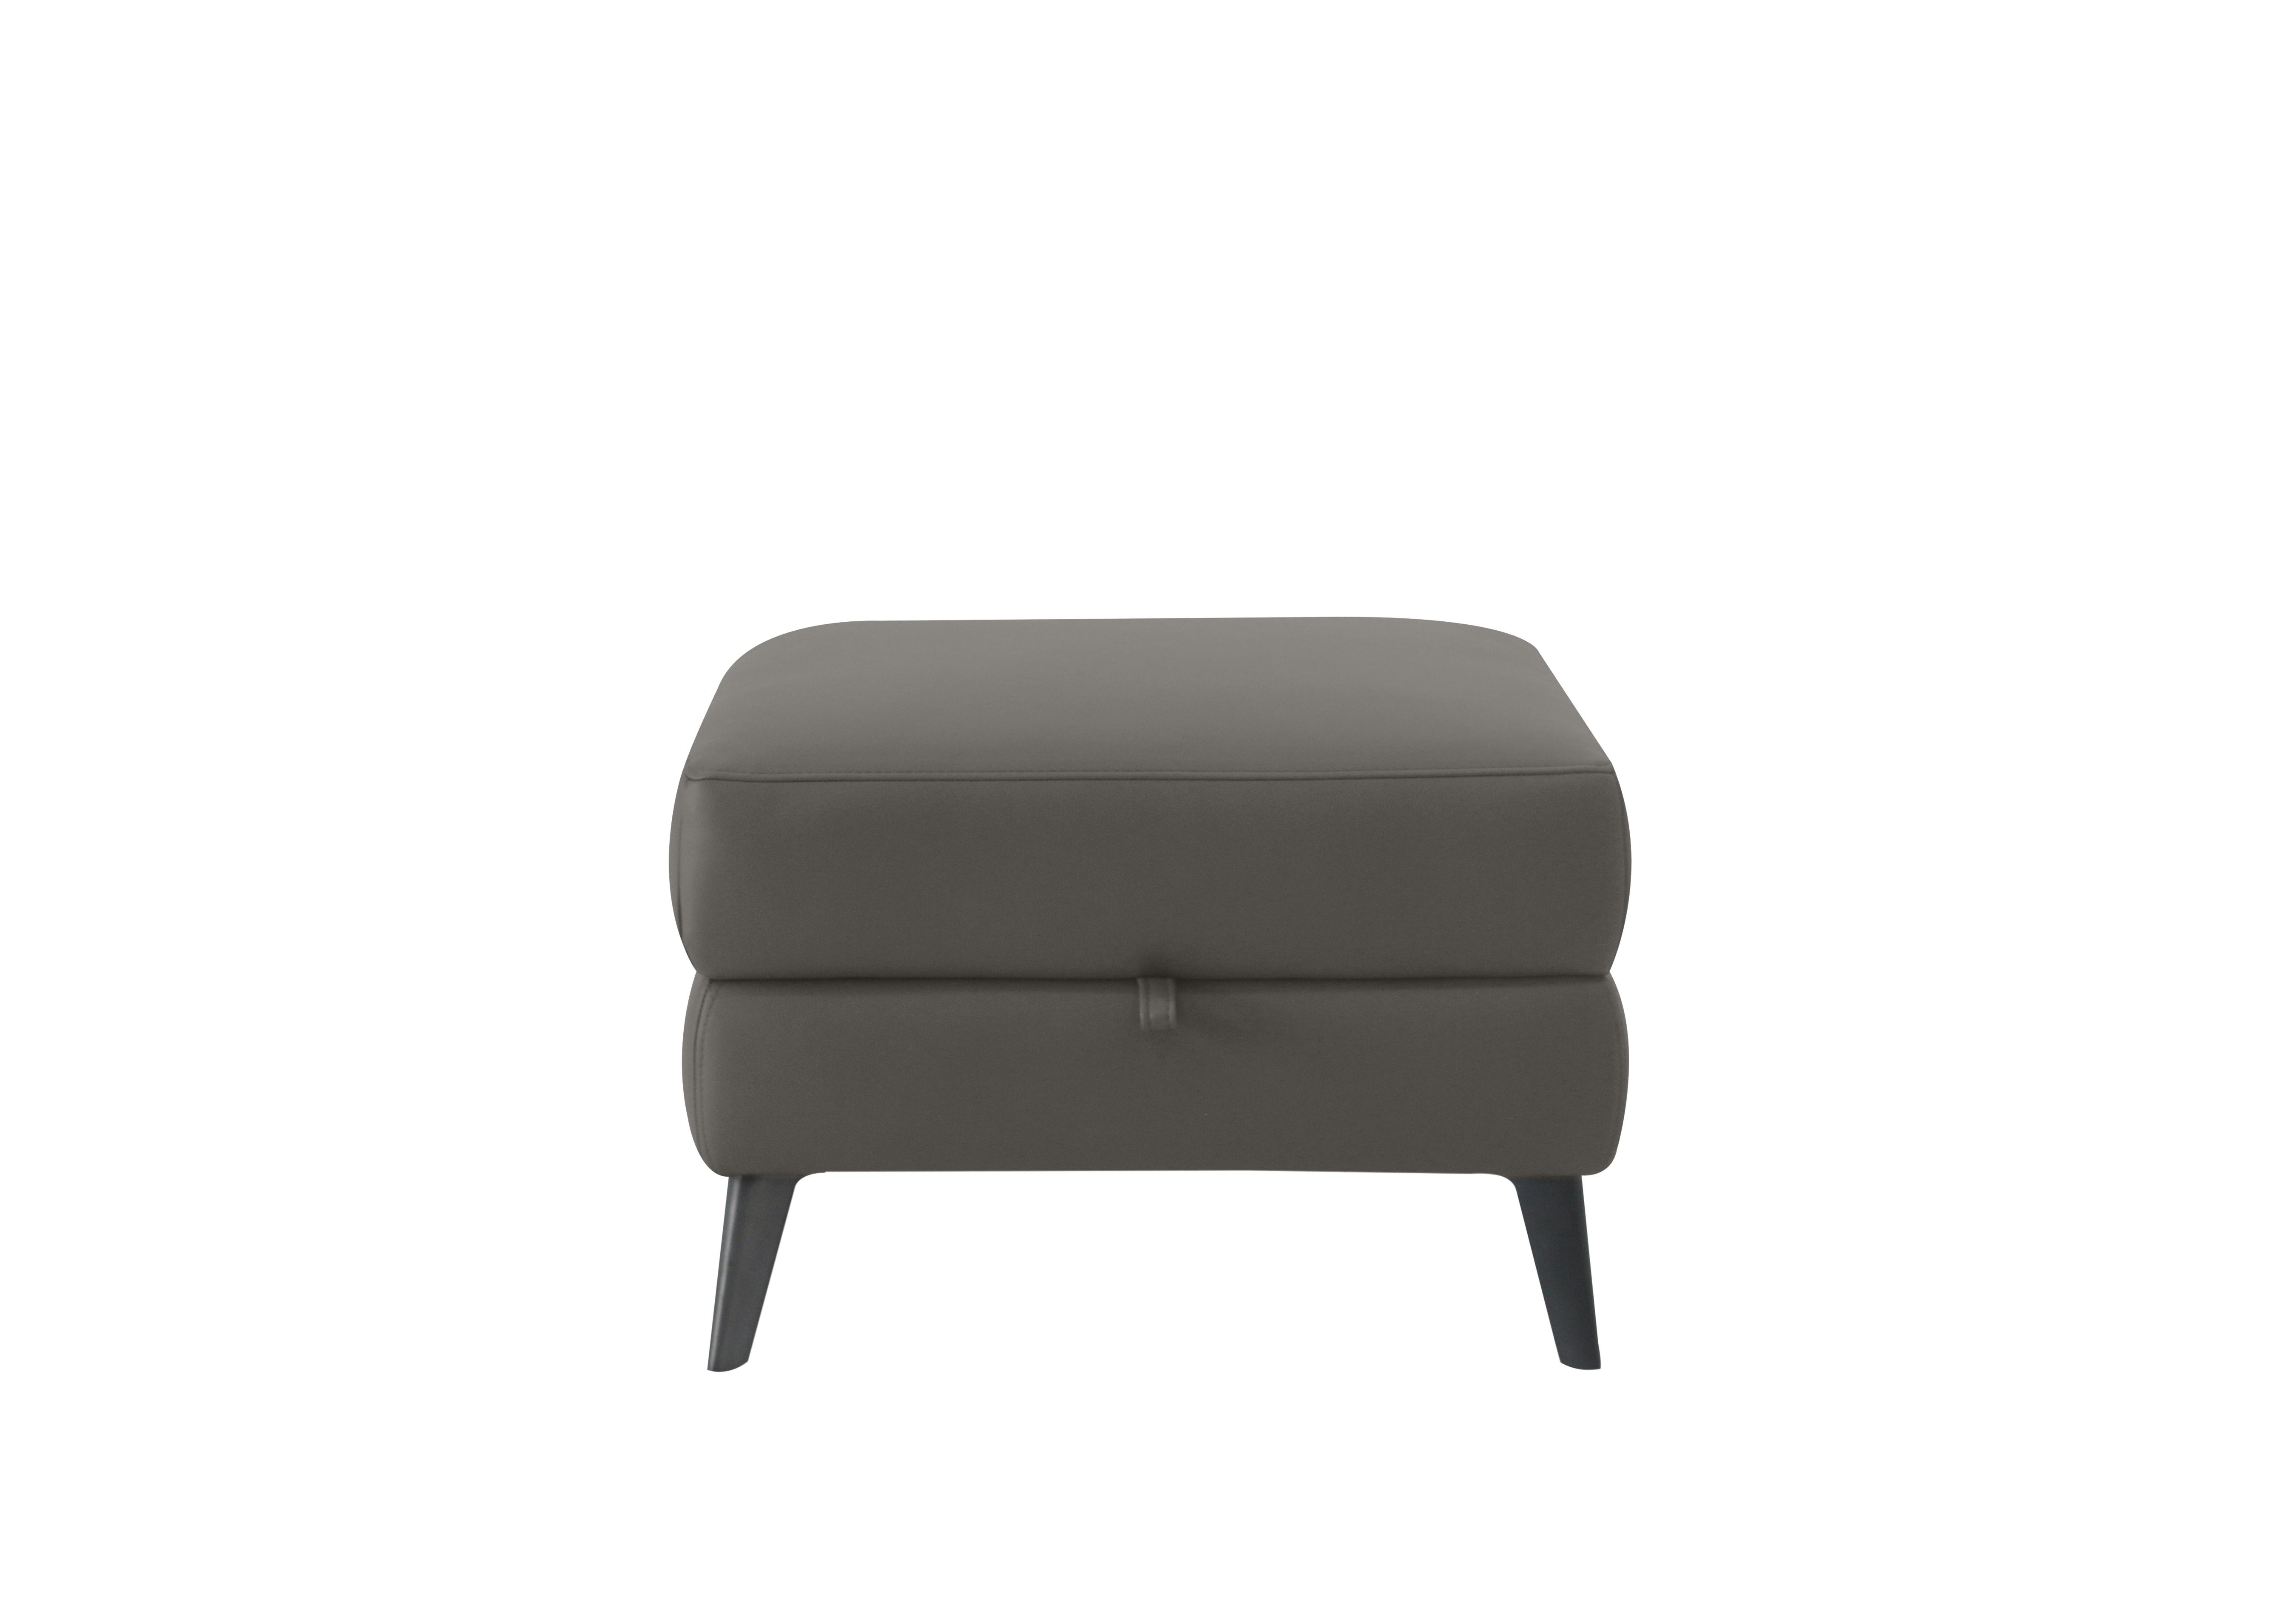 Huxley Leather Storage Footstool in Np-515e Elephant Grey on Furniture Village